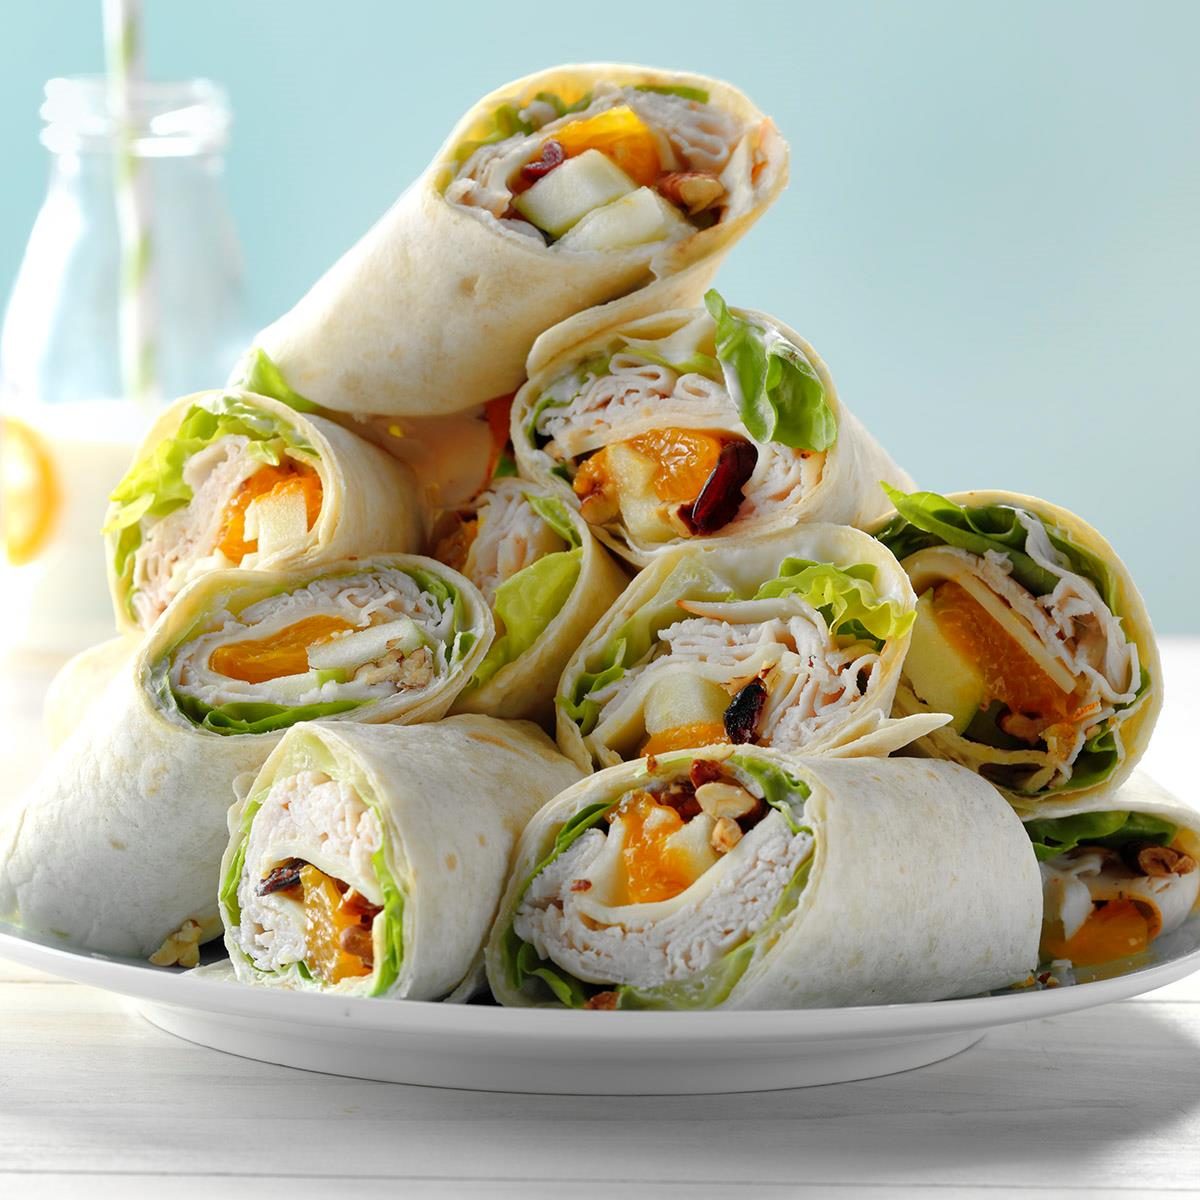 How To Make Turkey Wraps With Cream Cheese